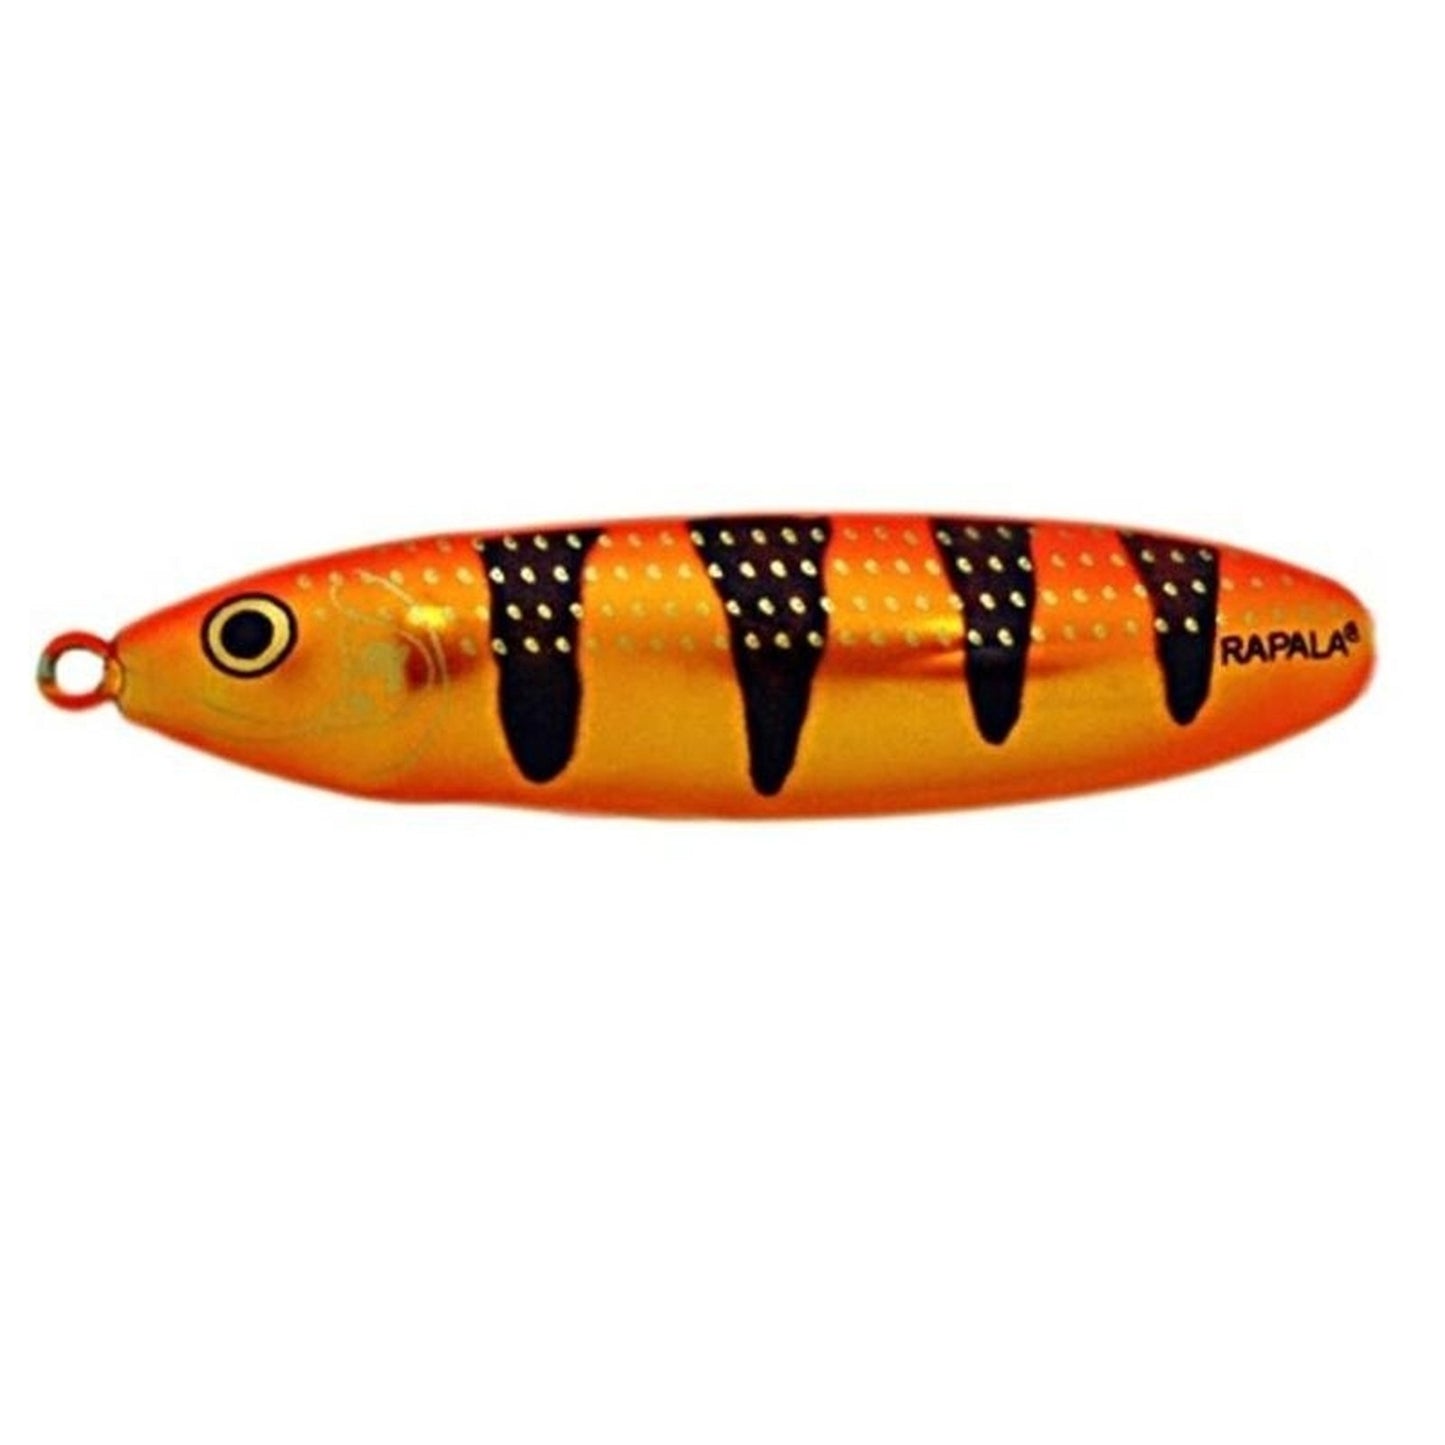 Rapala Weedless Minnow Spoon 8 GFRT Gold Fluorescent Red Tiger